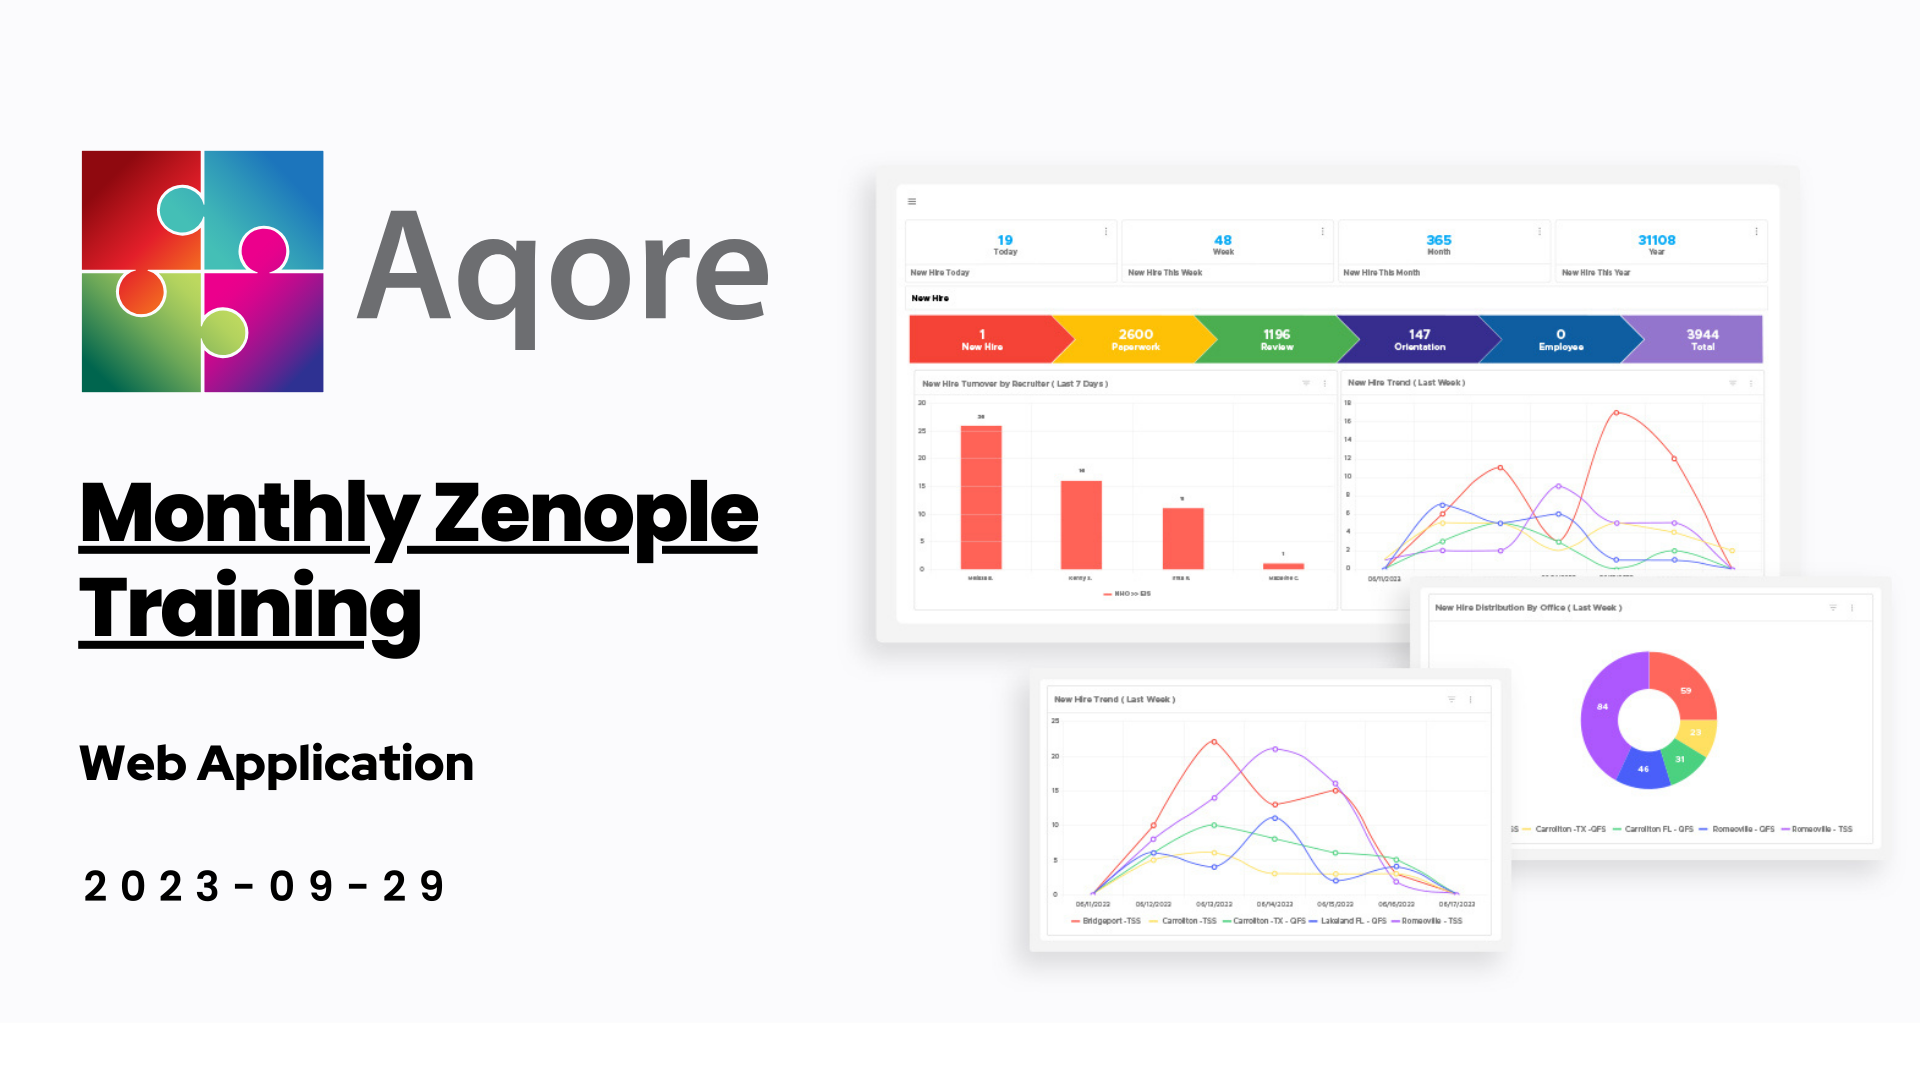 Best Practices for Searching in Zenople